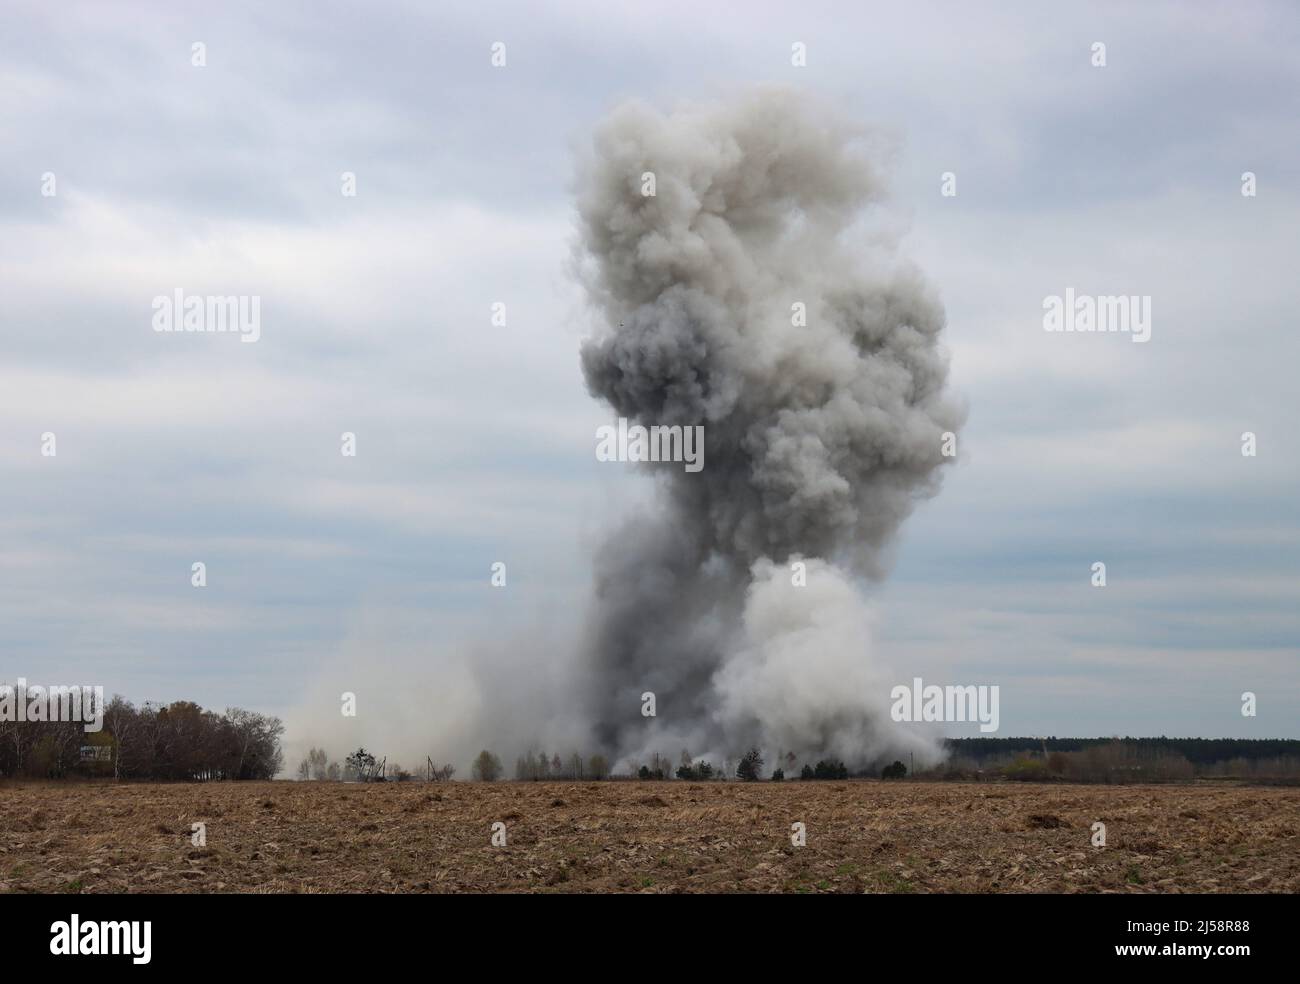 KYIV REGION, UKRAINE - APRIL 20, 2022 - Smoke rises over the site of the controlled detonation during the disposal of ammunition collected in the terr Stock Photo